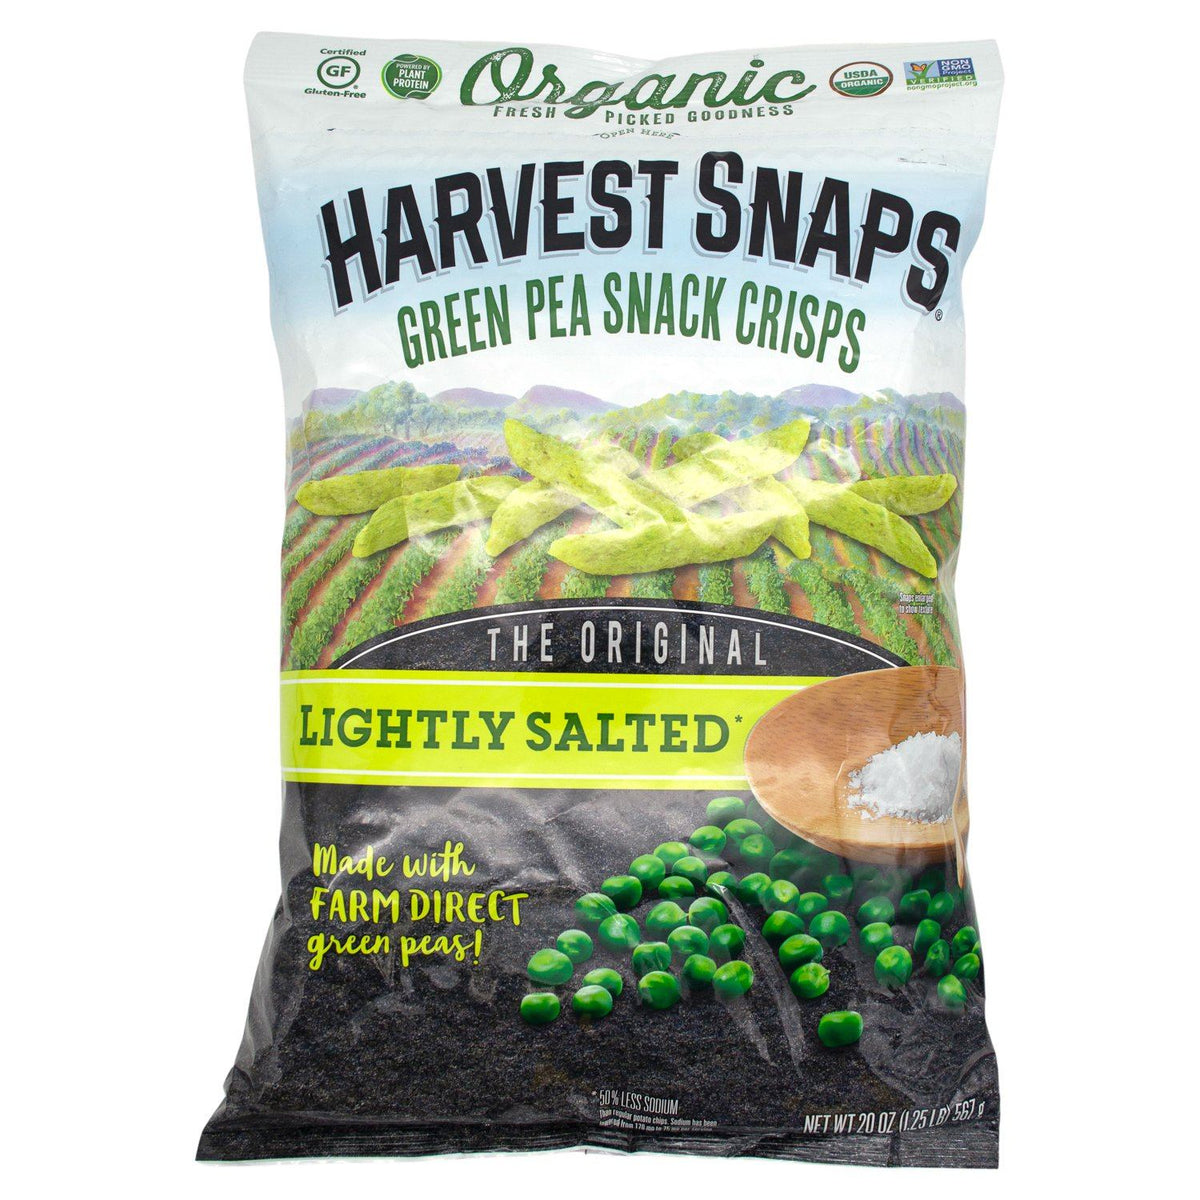 Review of Harvest Snaps Baked Green Pea Snacks - Delishably